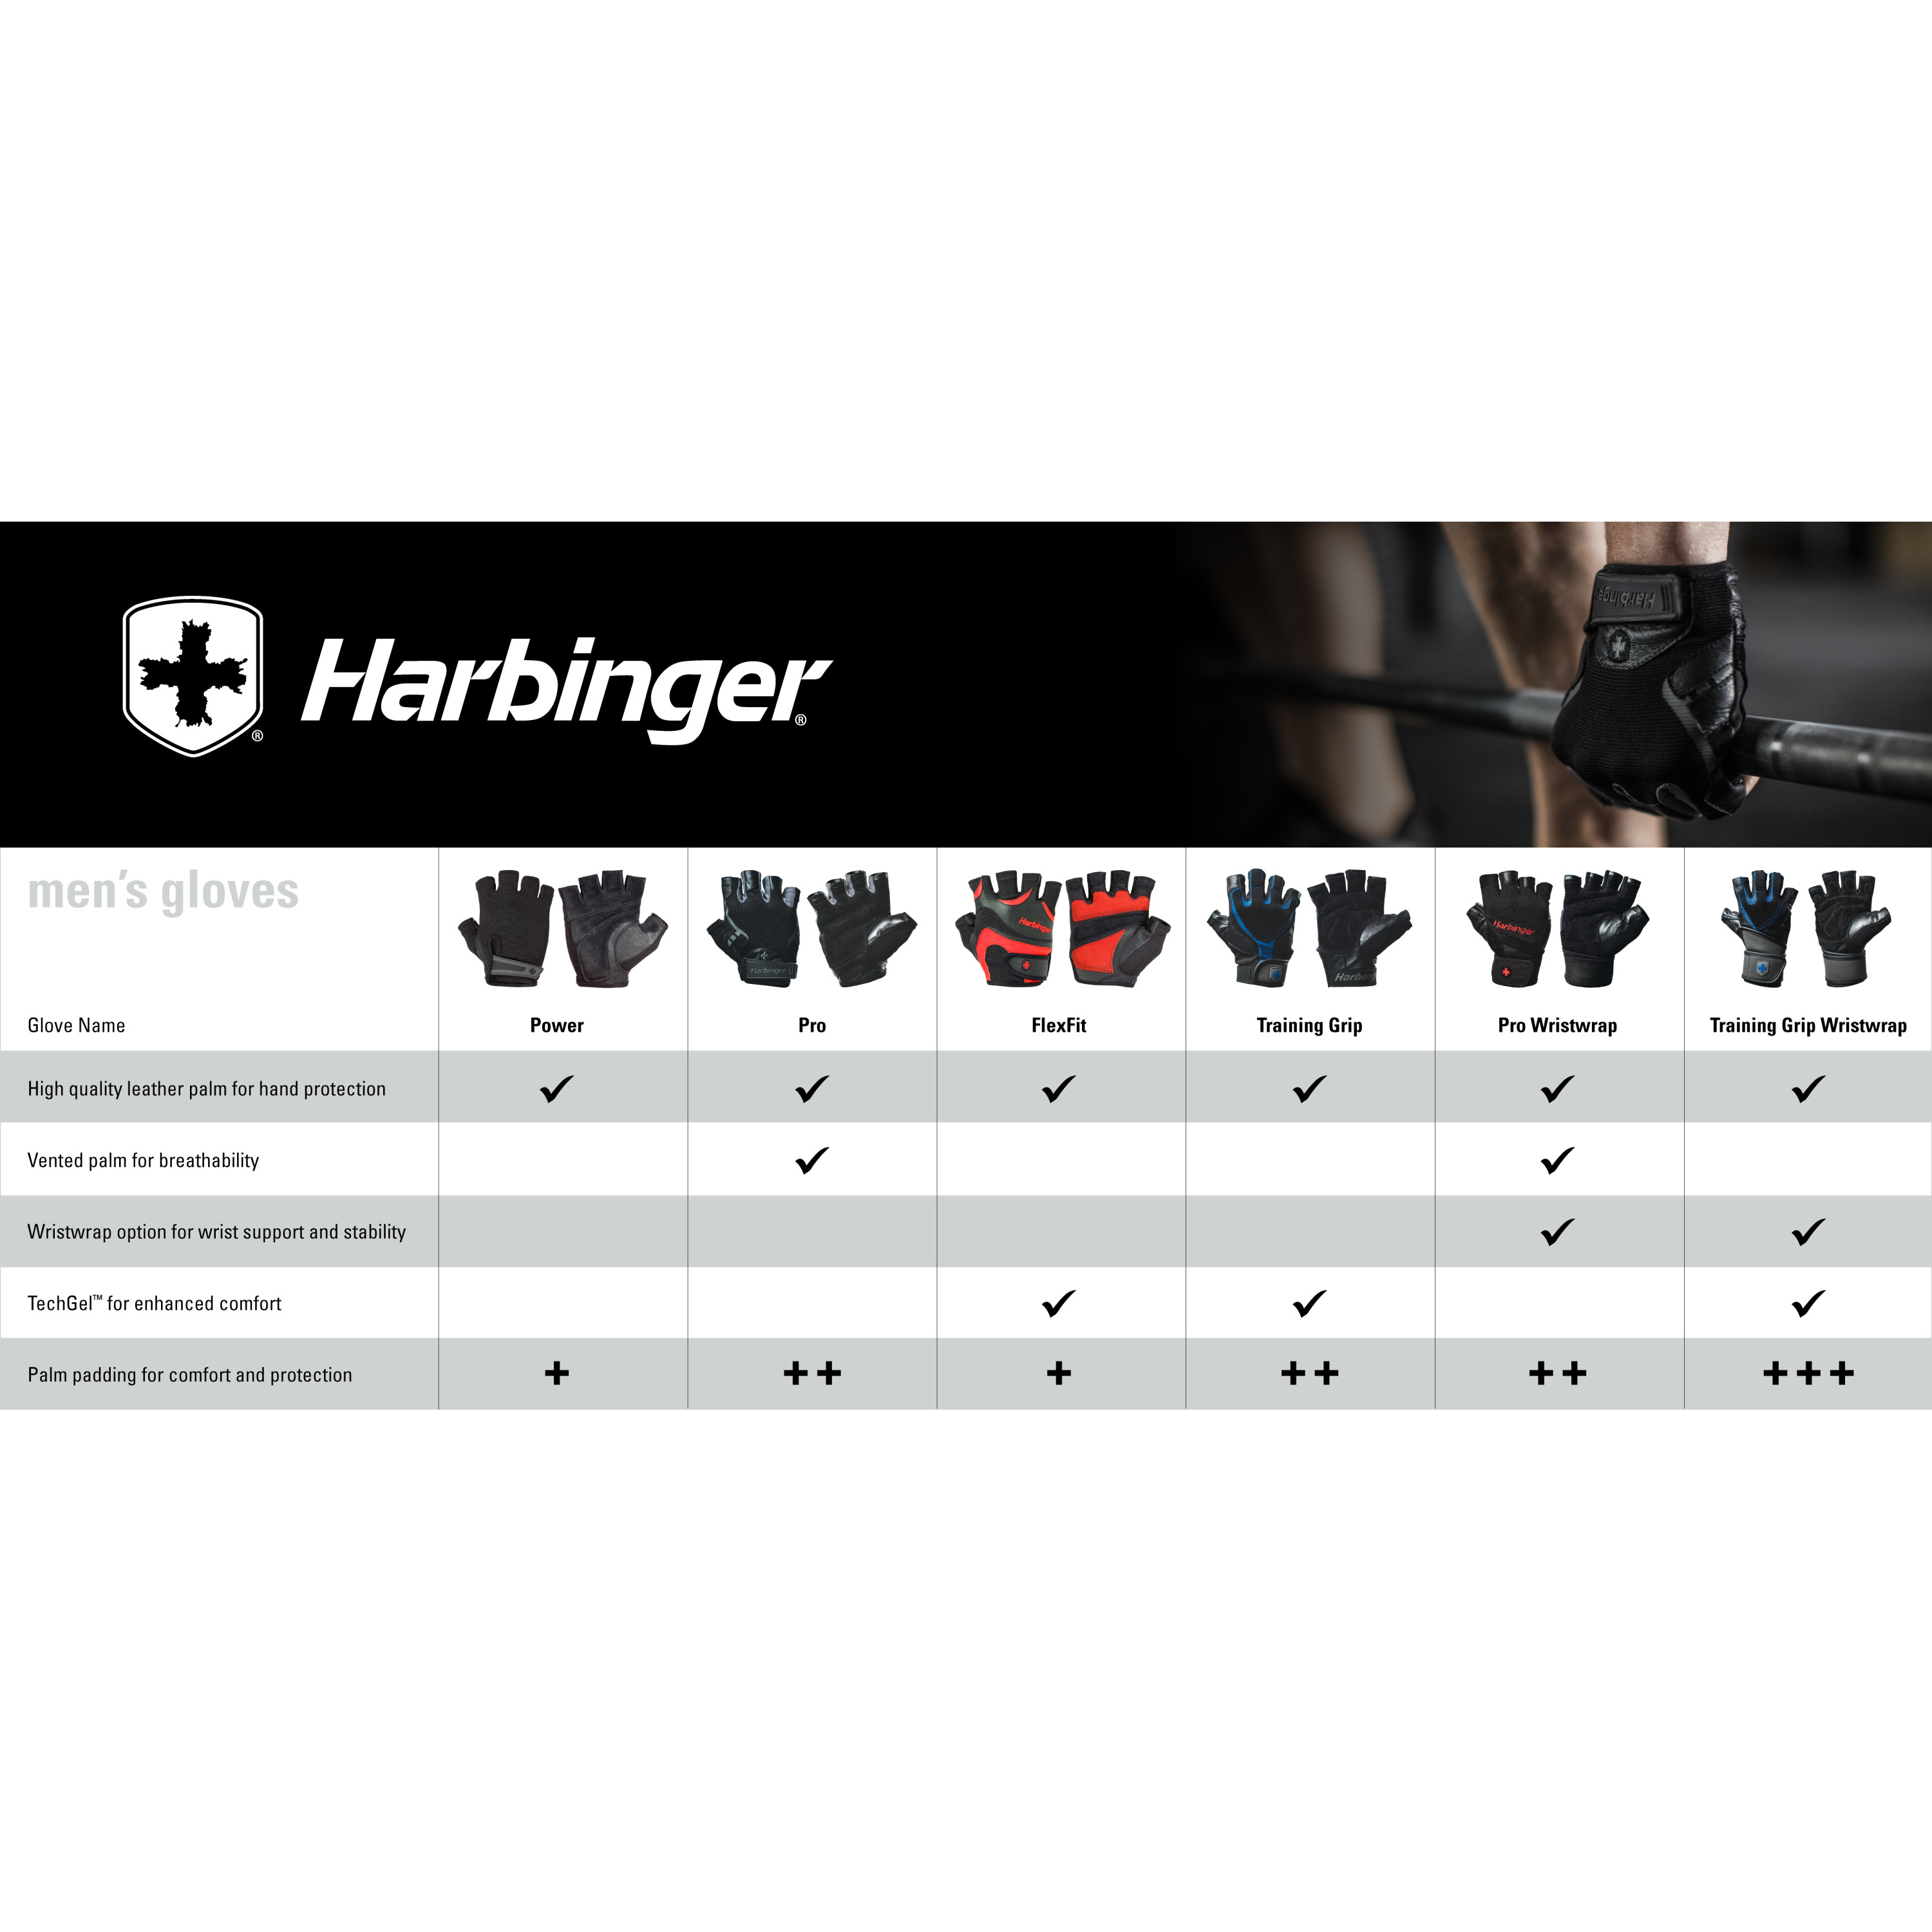 Harbinger Training Grip Wristwrap Weightlifting Gloves with TechGel-Padded Leather Palm (Pair), Small - image 3 of 8